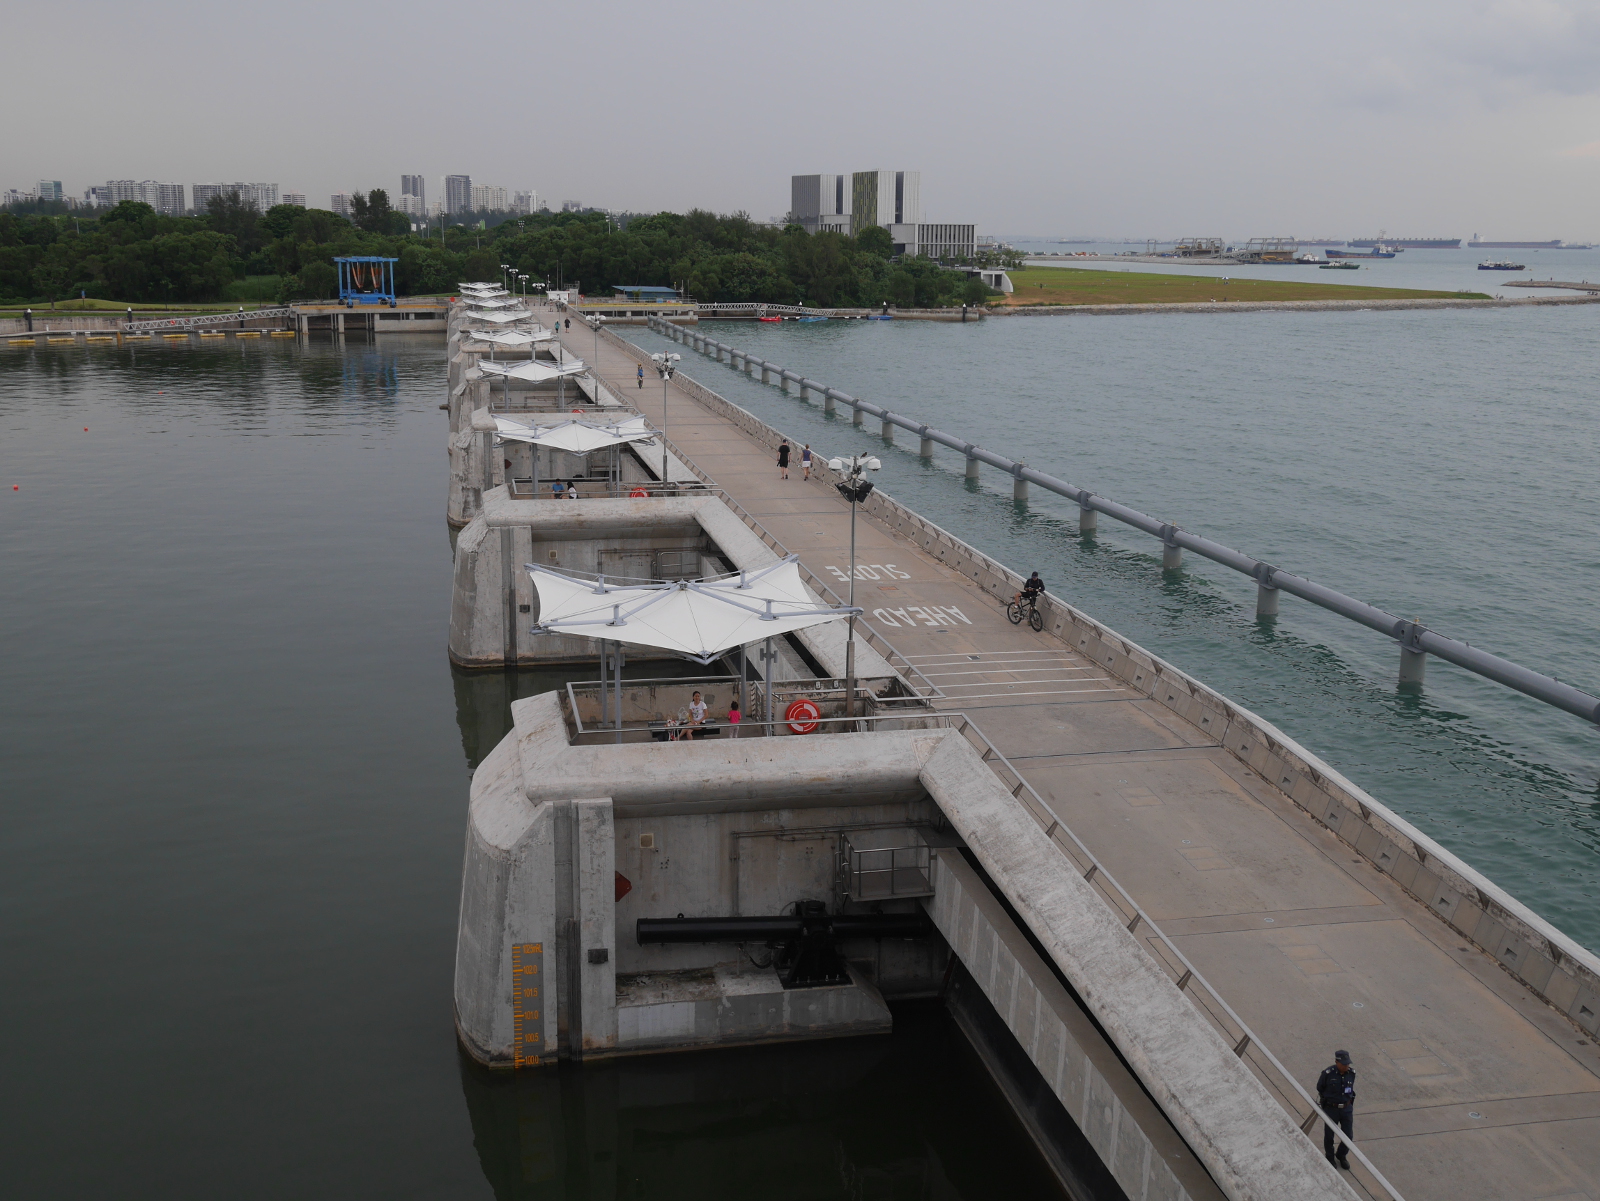 Marina Barrage, completed in 2008.